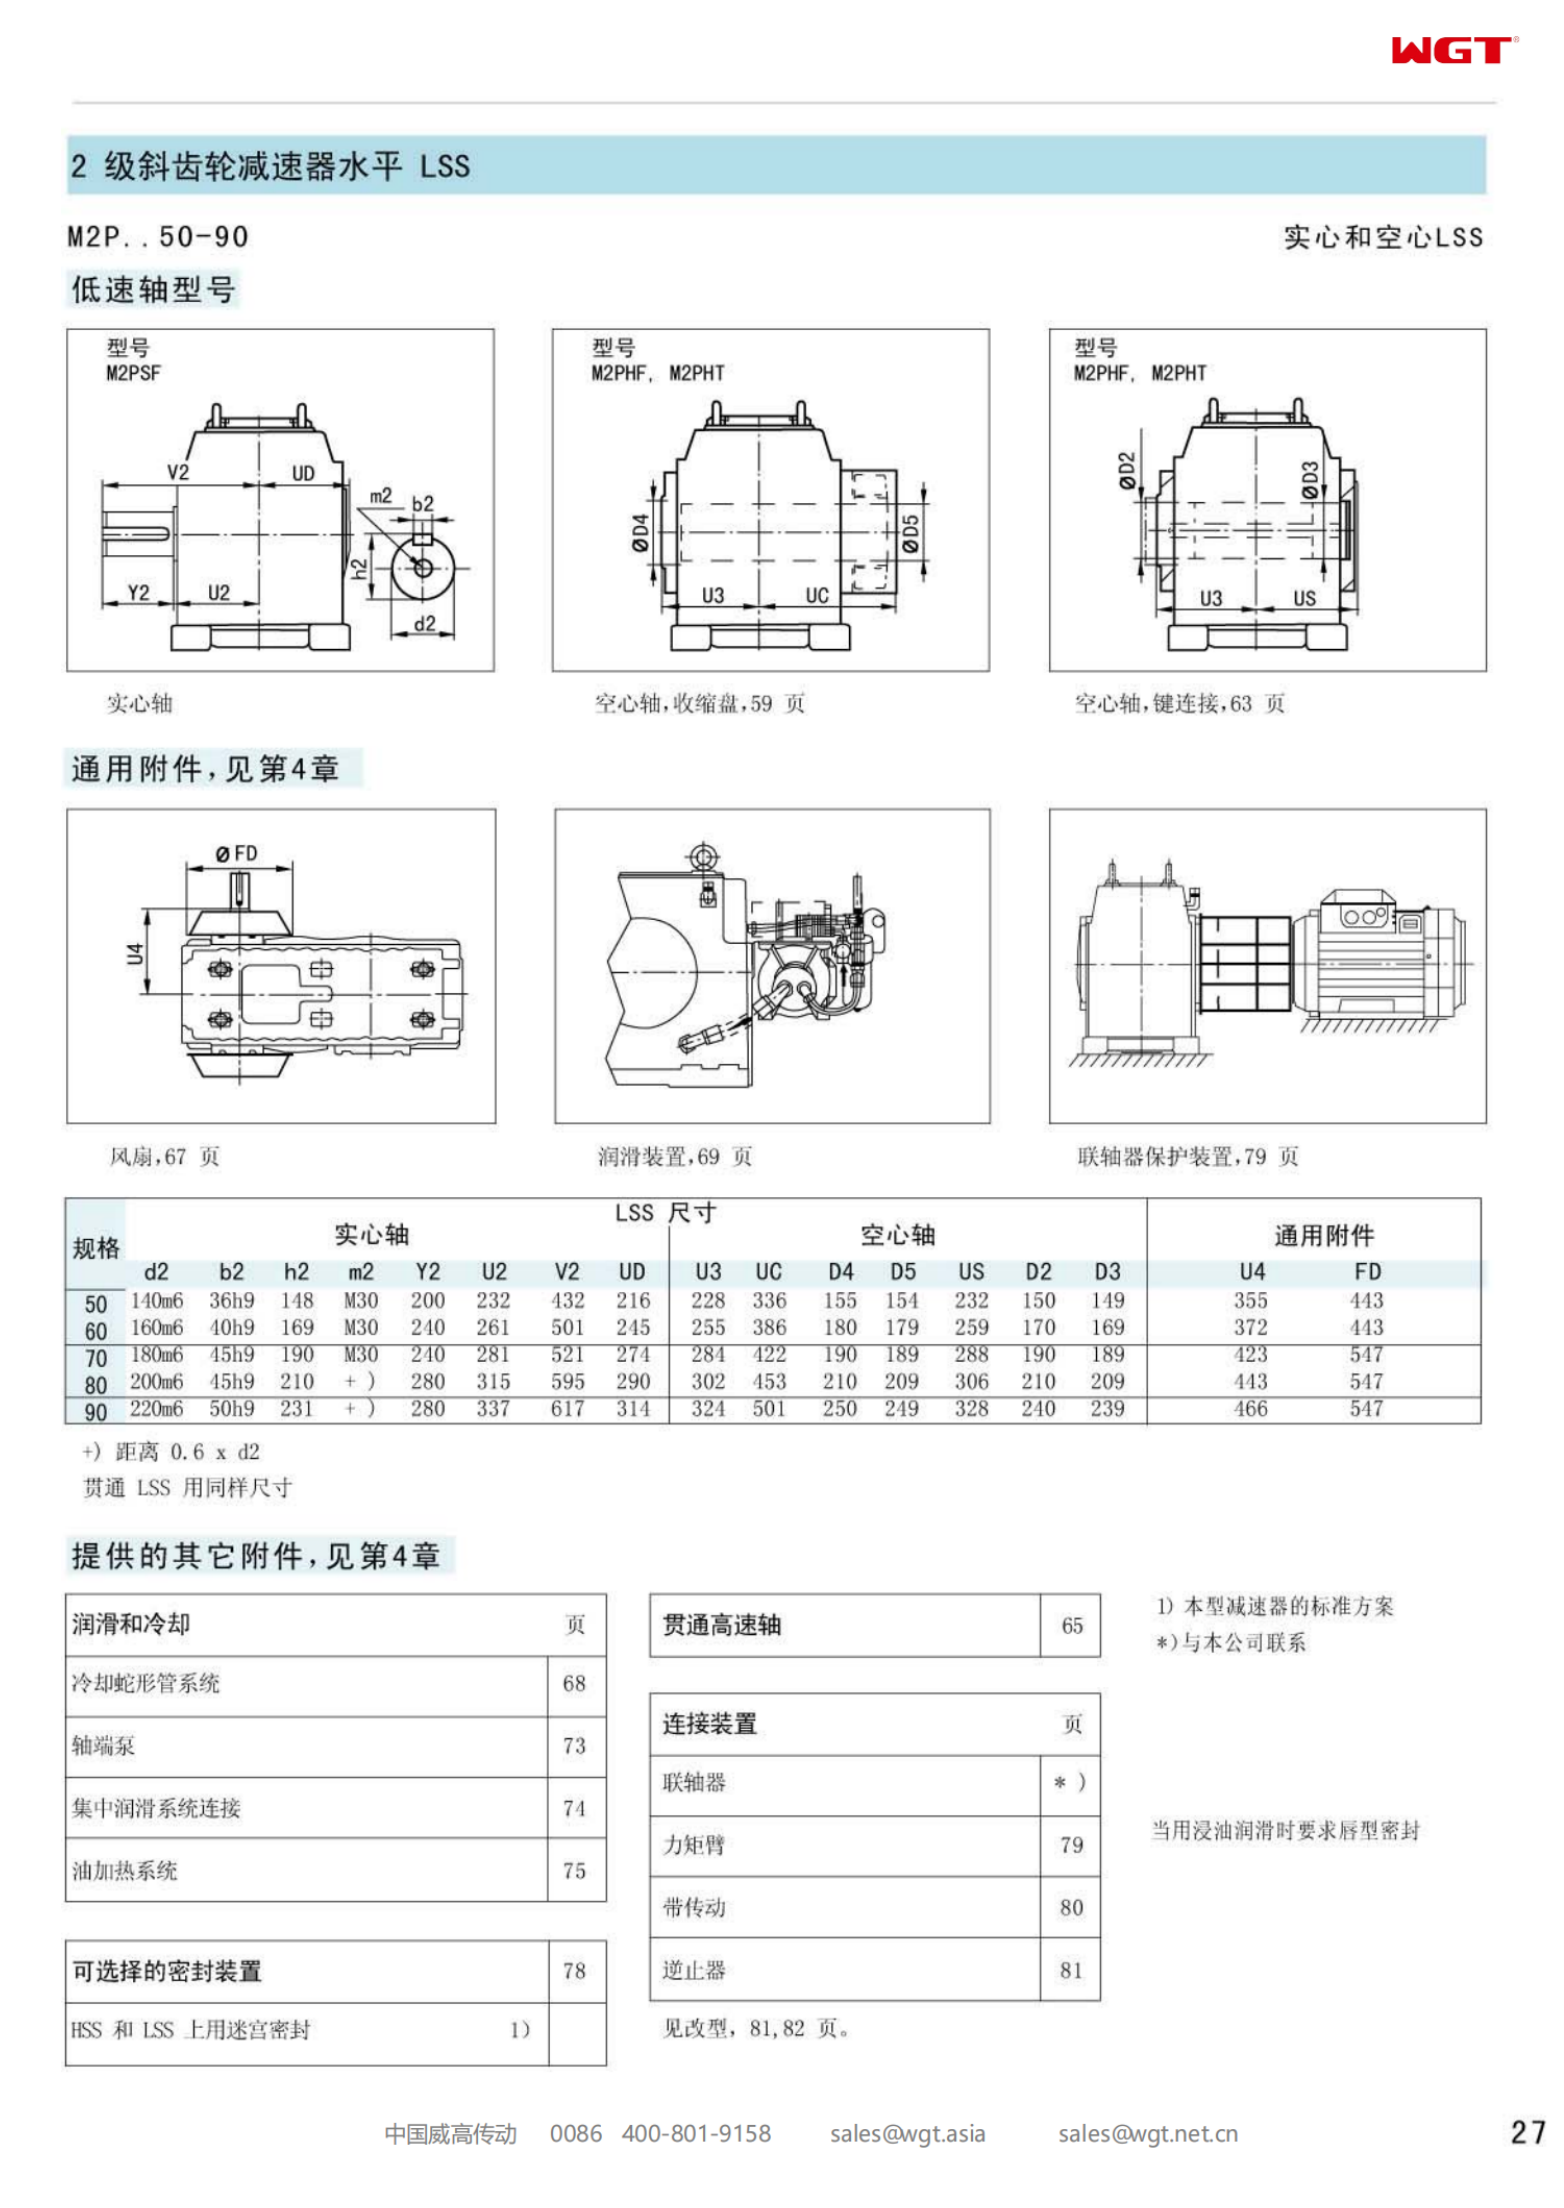 M2PSF70 Replace_SEW_M_Series Gearbox